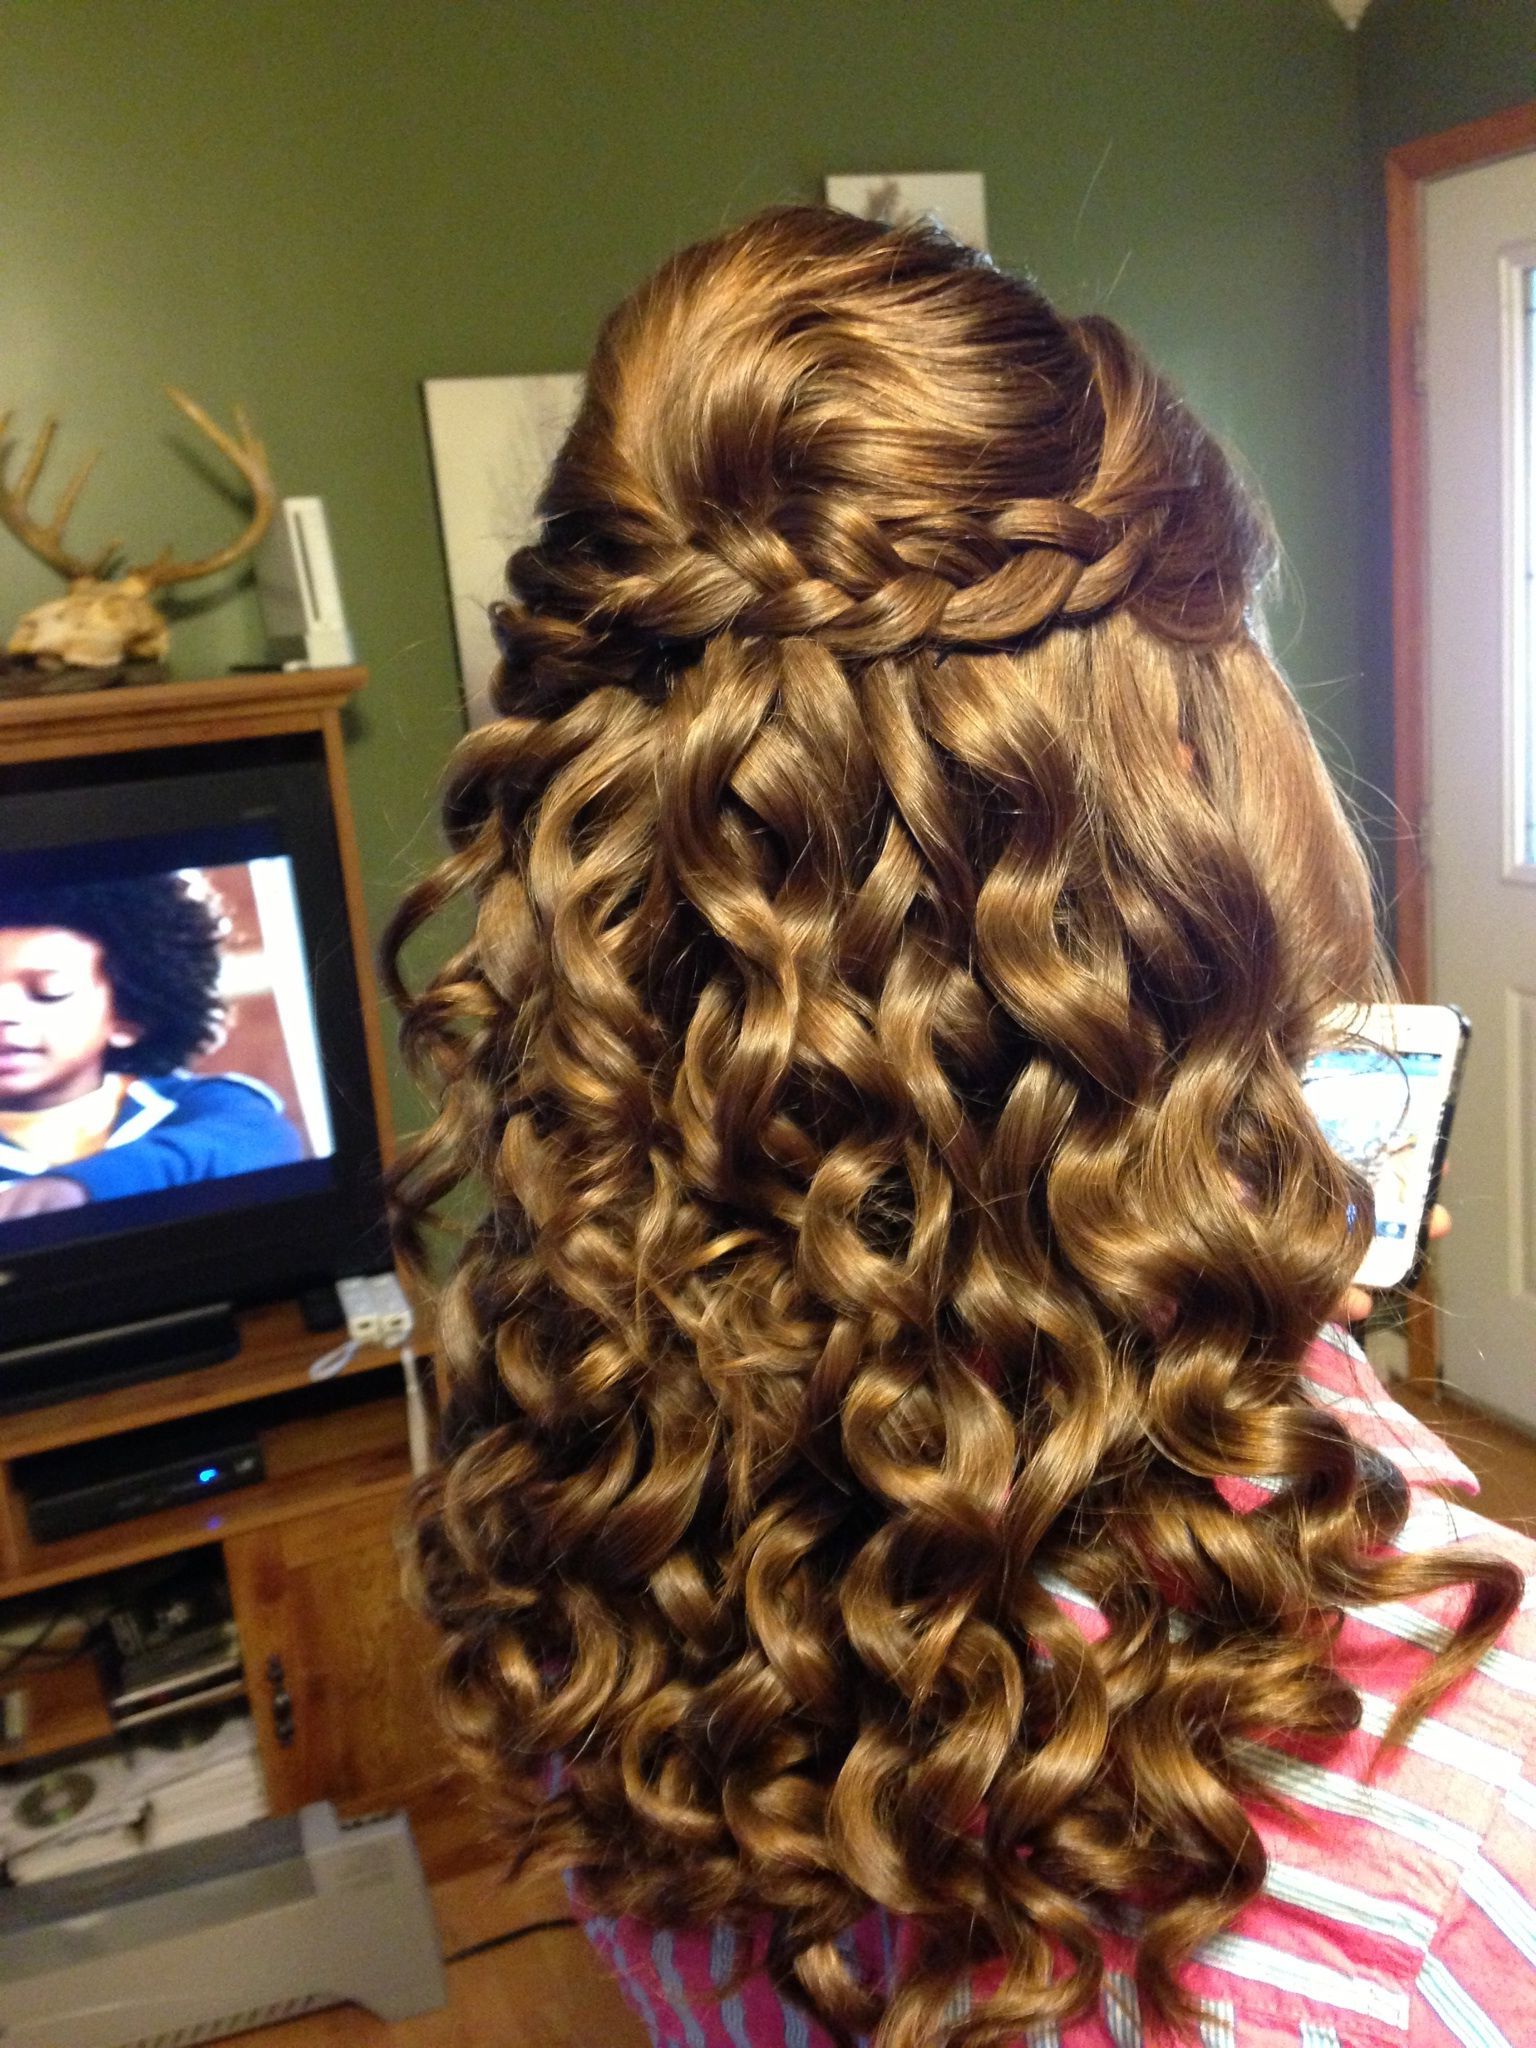 Most Current Curly Prom Prom Hairstyles Inside 23 Prom Hairstyles Ideas For Long Hair (View 4 of 20)